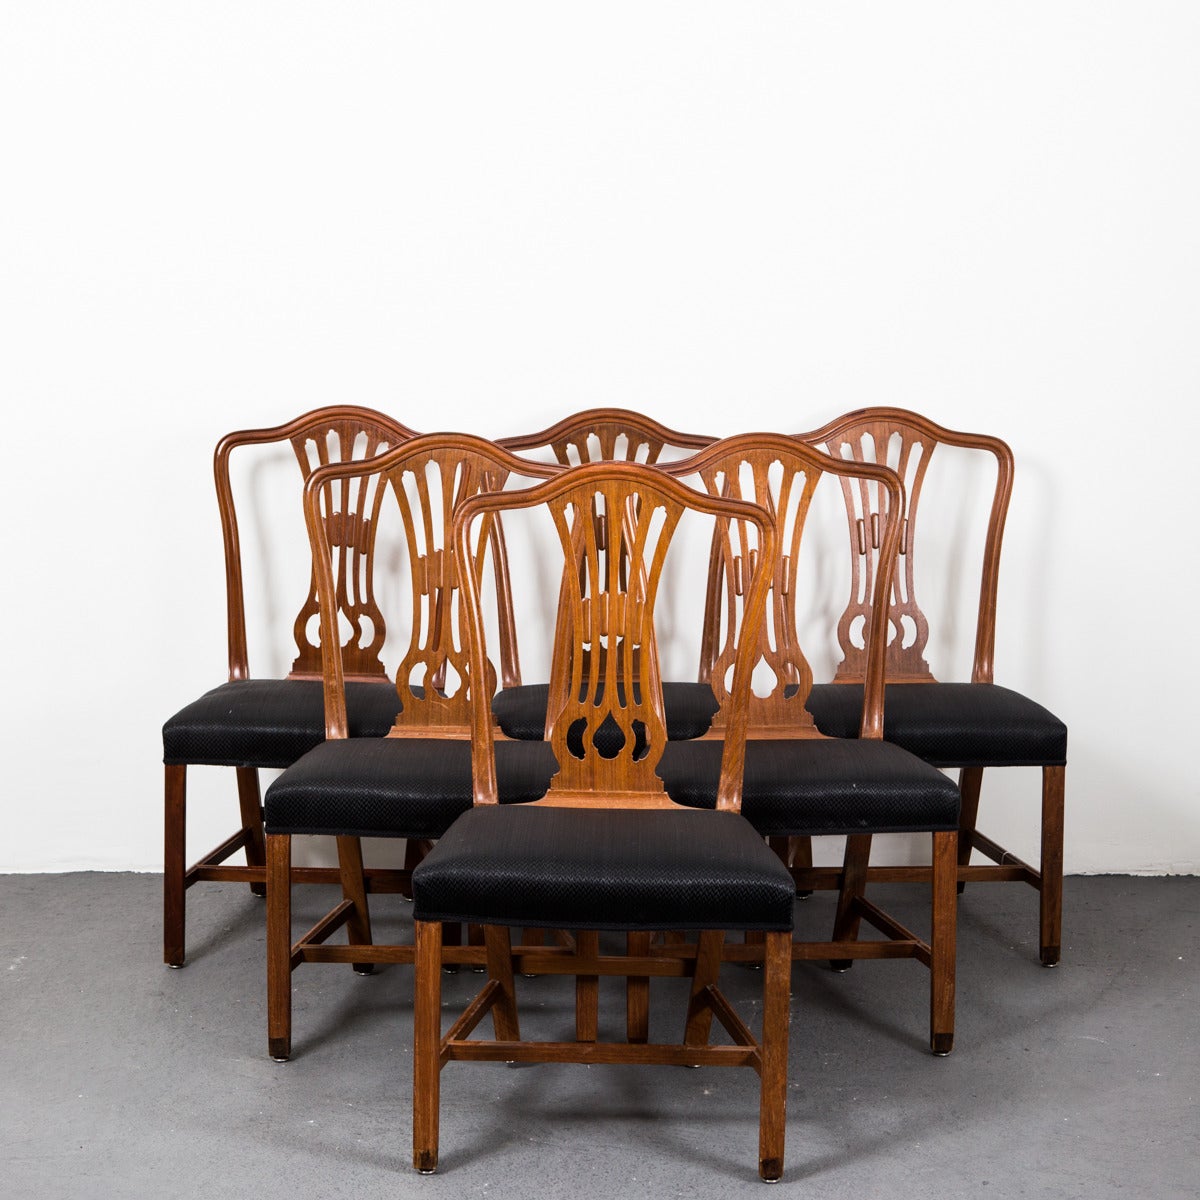 A set of six dining chairs made in mahogany, England, 19th century. Seat upholstered in horse hair.